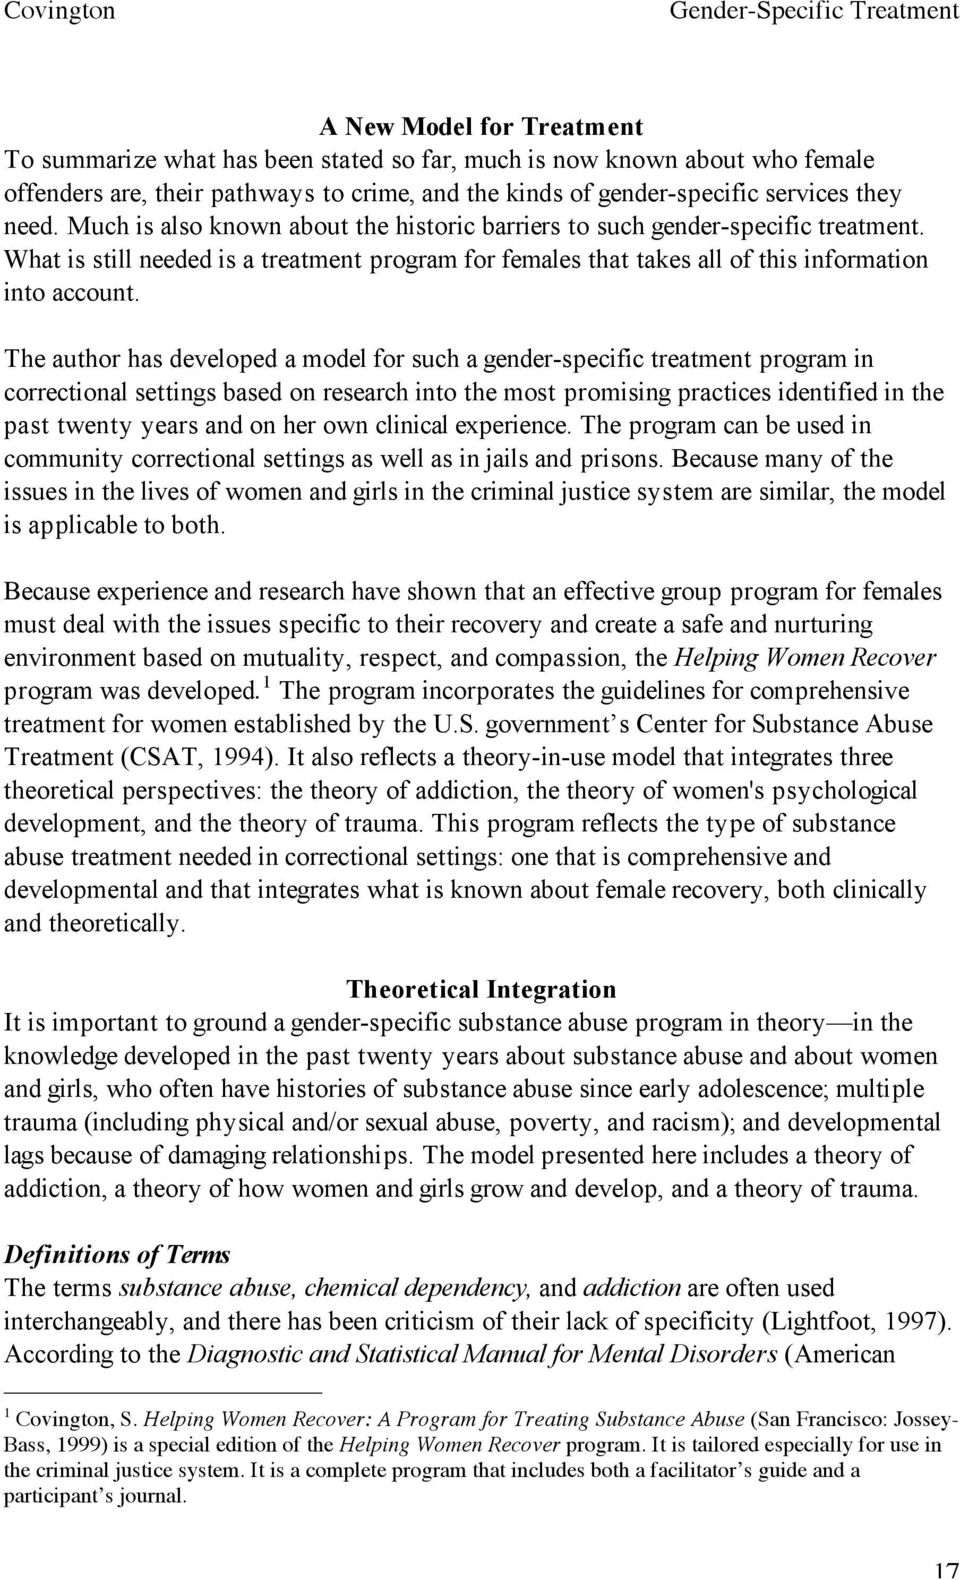 The author has developed a model for such a gender-specific treatment program in correctional settings based on research into the most promising practices identified in the past twenty years and on